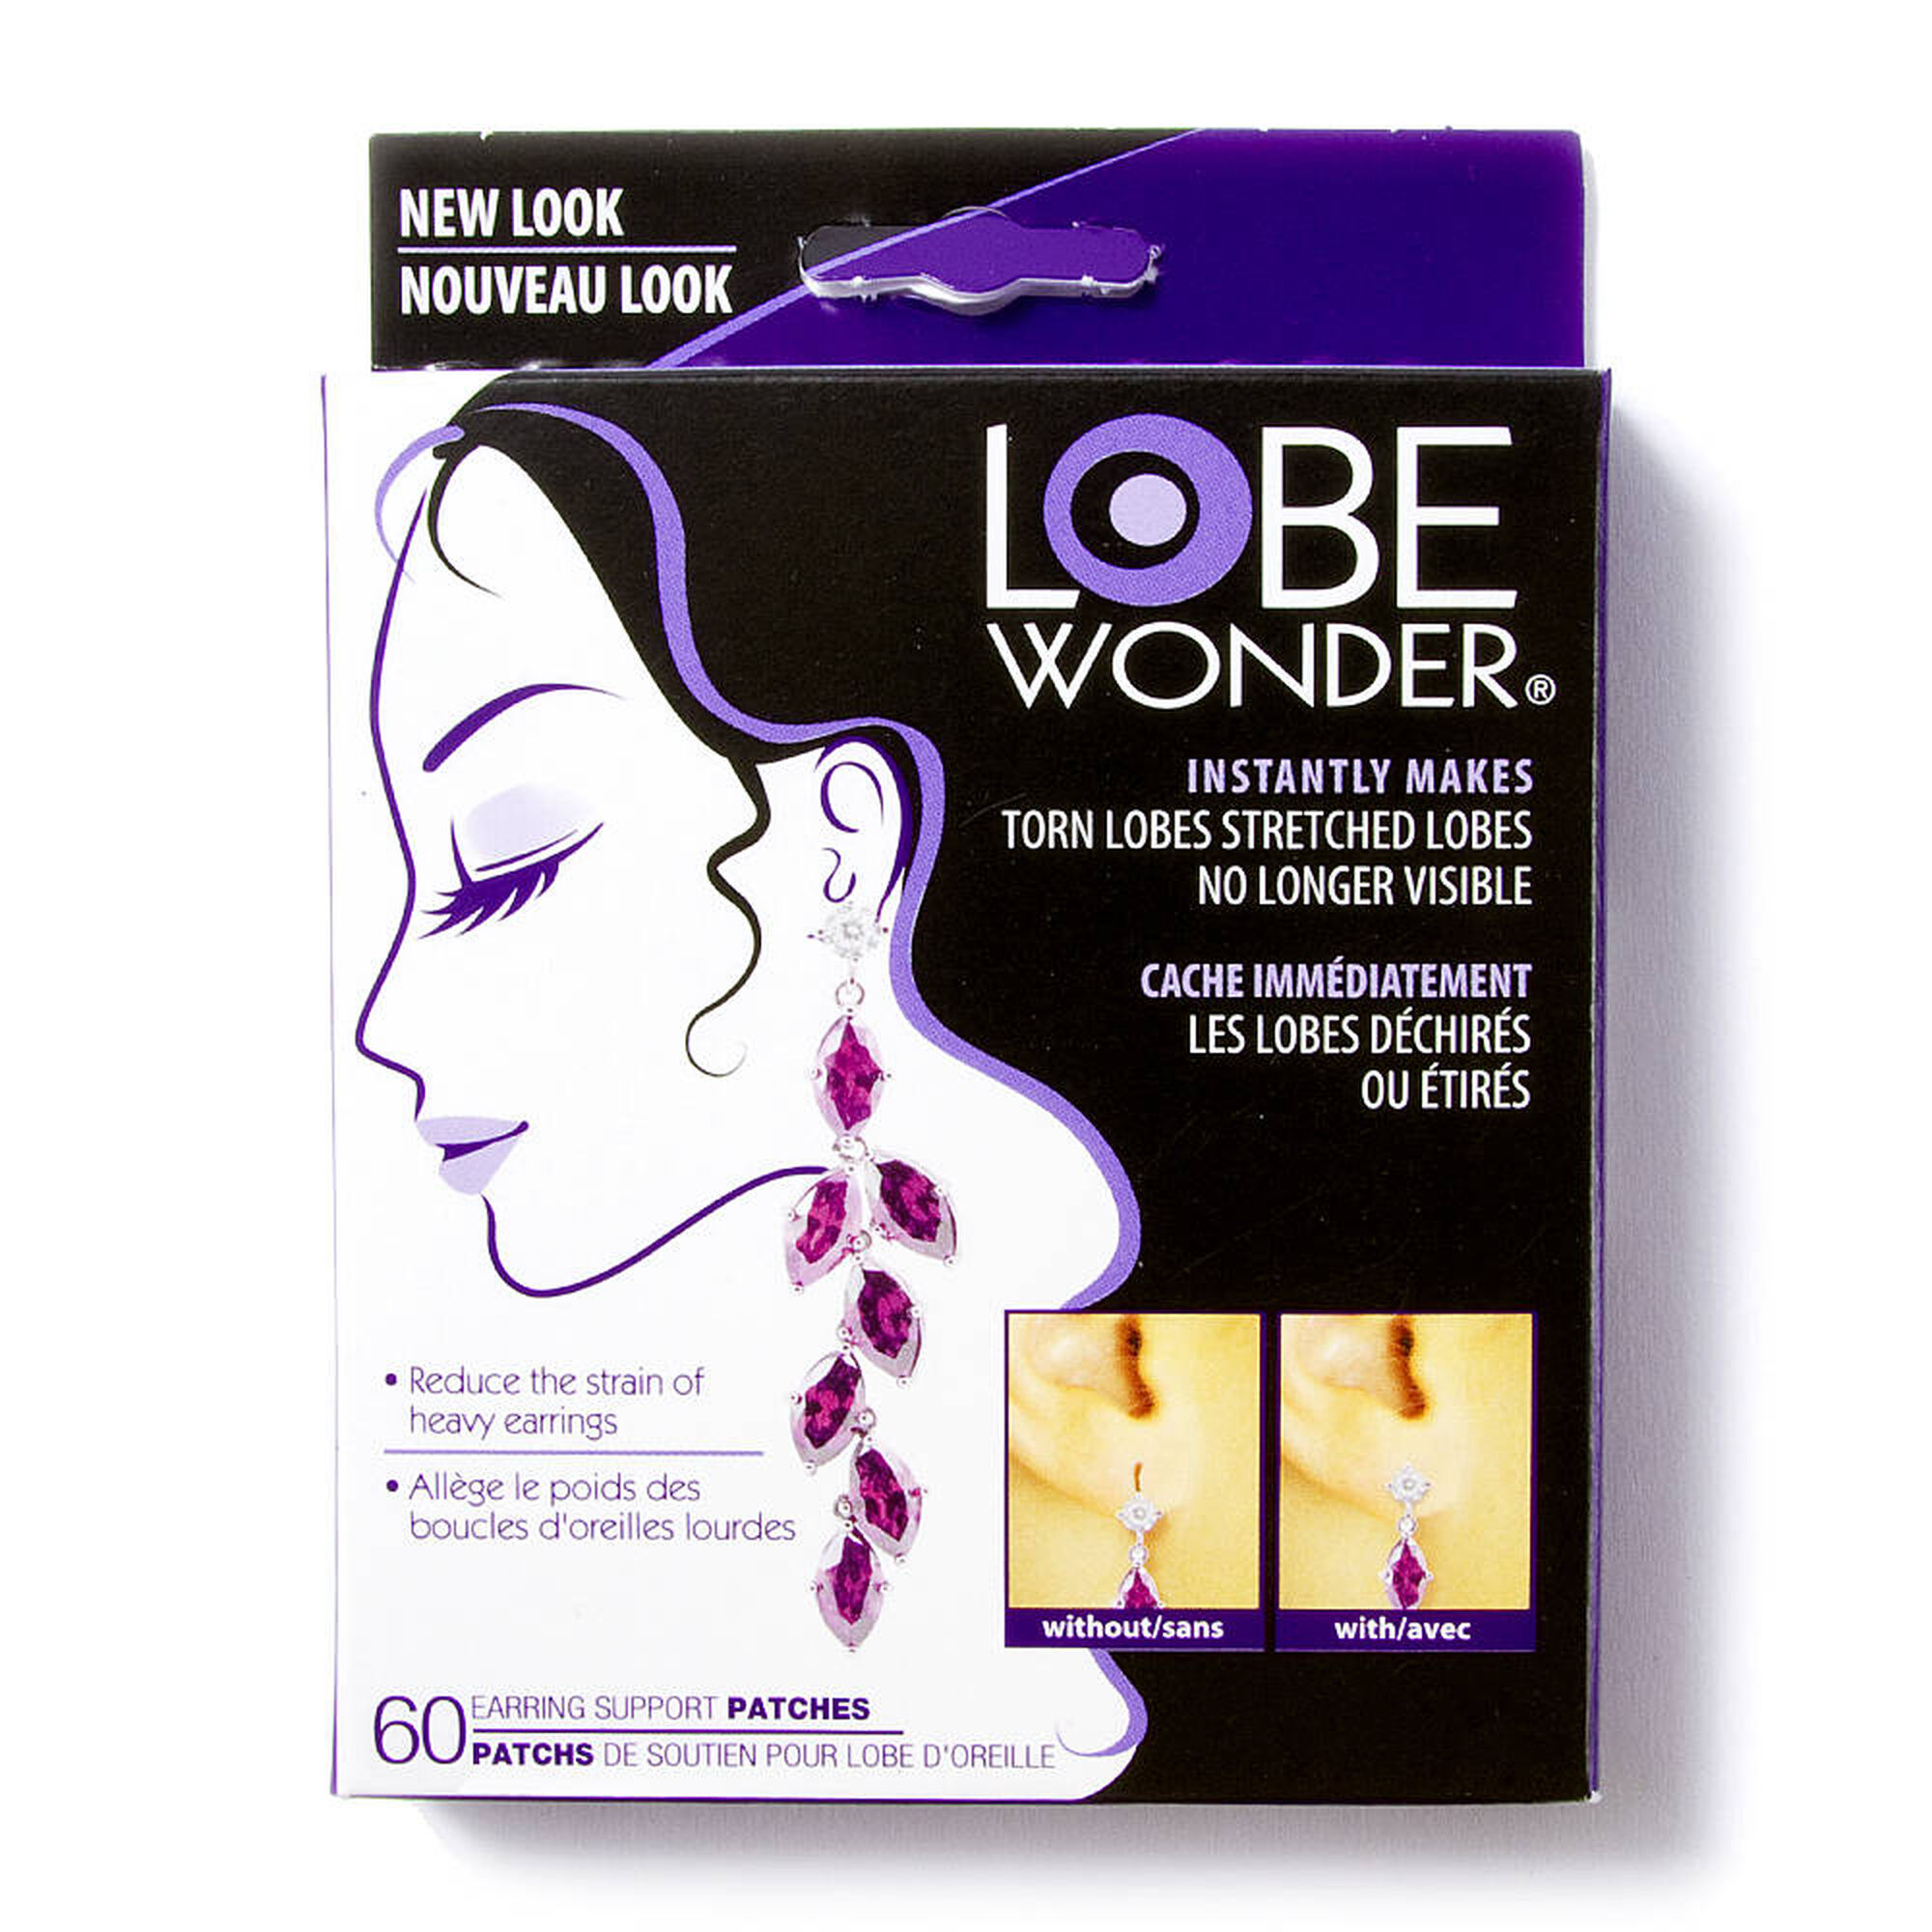 Lobe Wonder Ear Support Patches – Olive & Piper